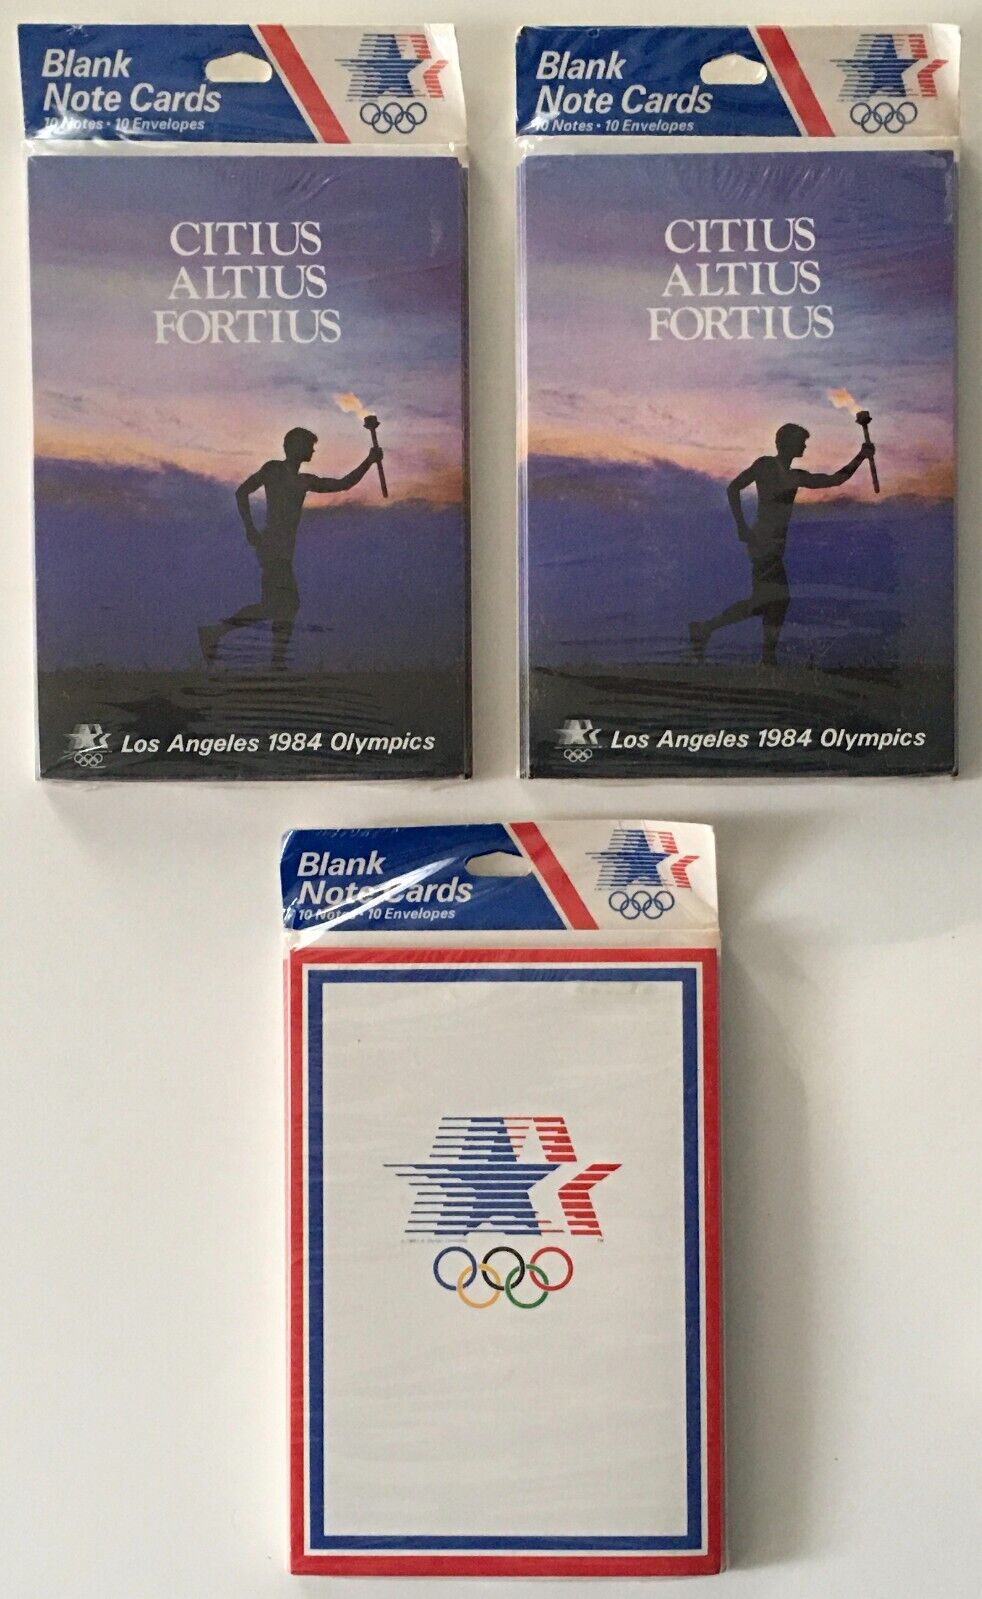 Los Angeles 1984 Olympic Games Blank Note Cards and Envelopes Lot of 3 New Packs